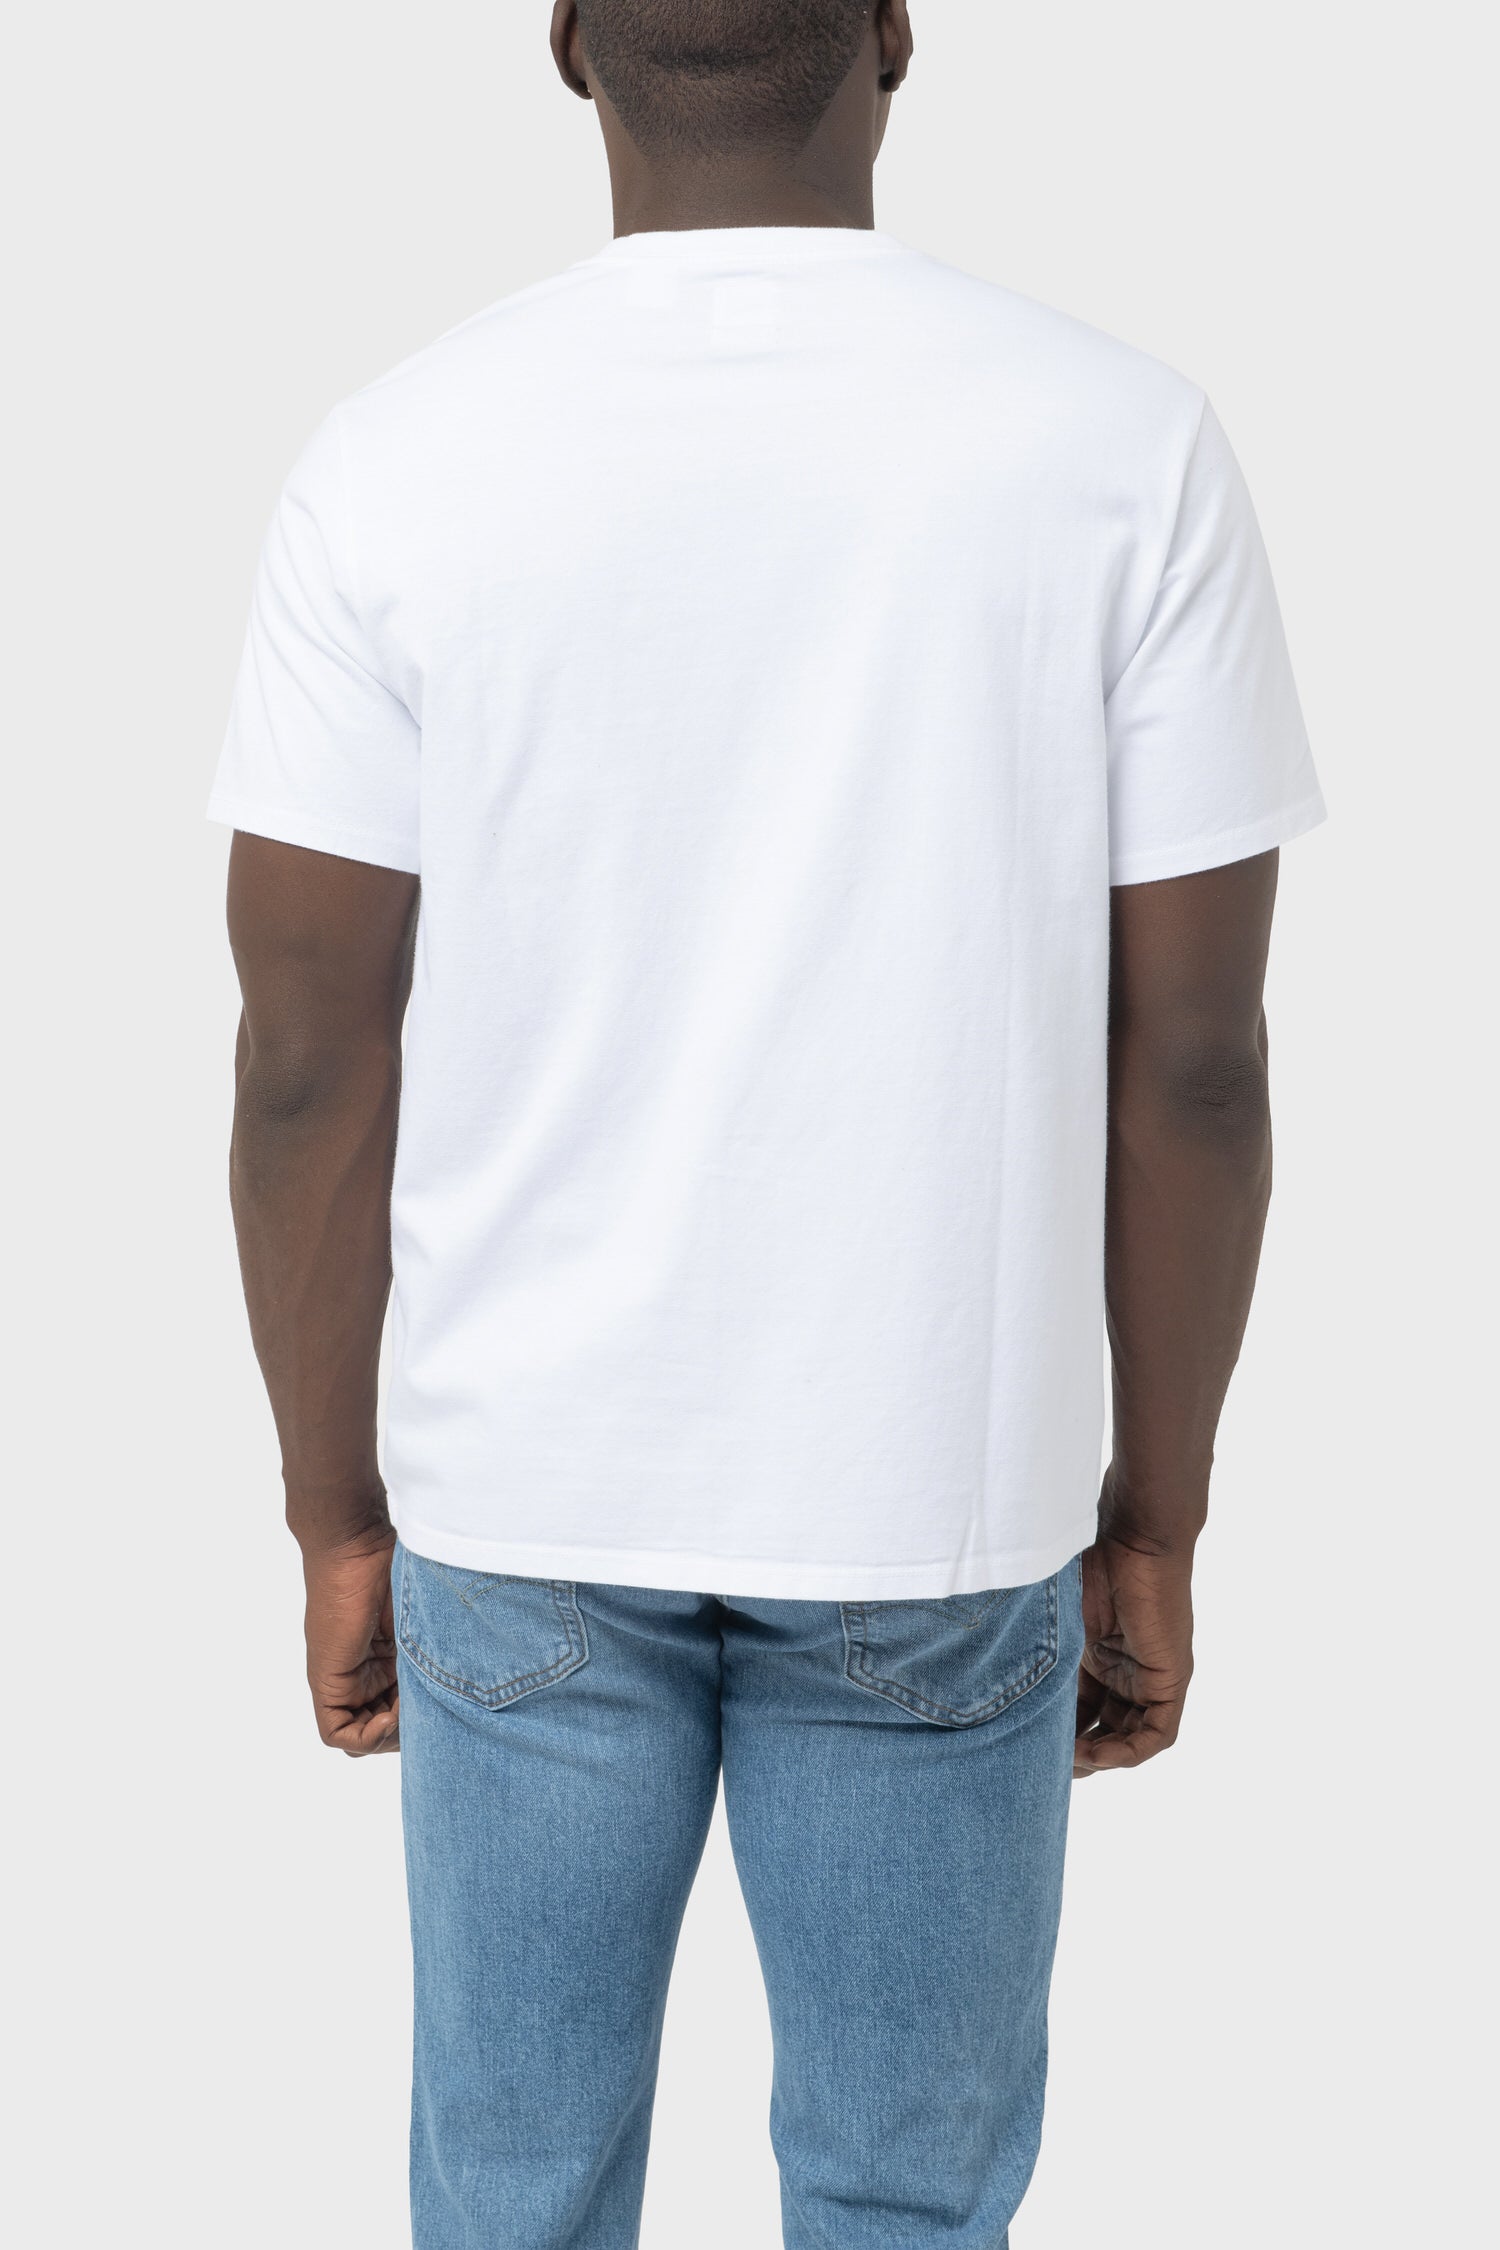 Men's Levi's Relaxed Fit Pocket Tee in White